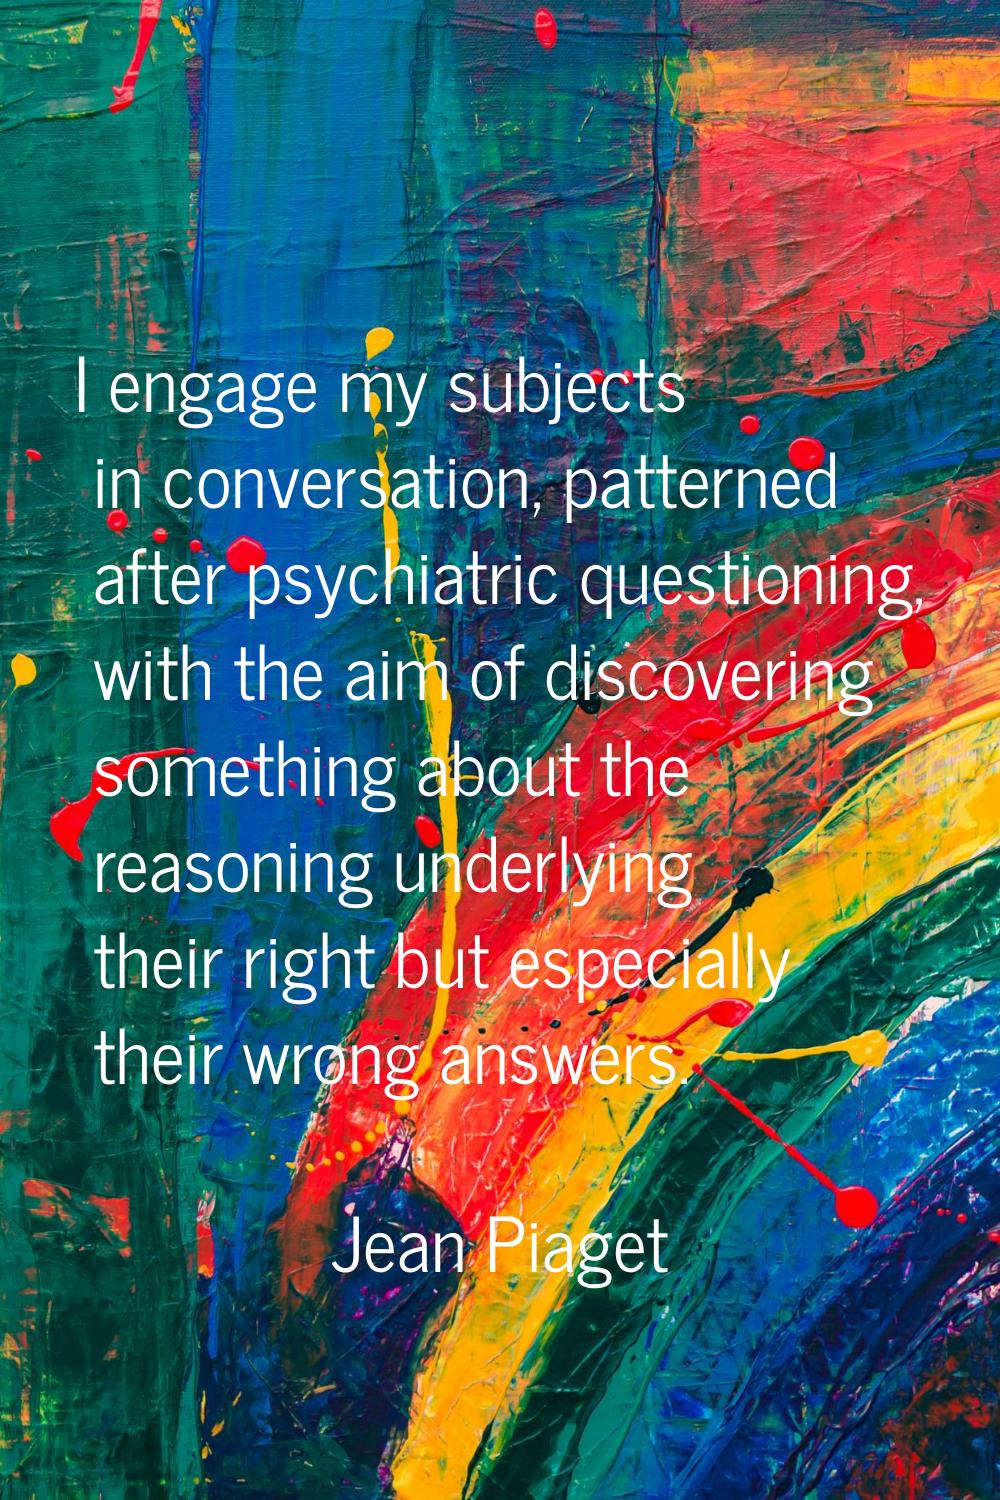 I engage my subjects in conversation, patterned after psychiatric questioning, with the aim of disc